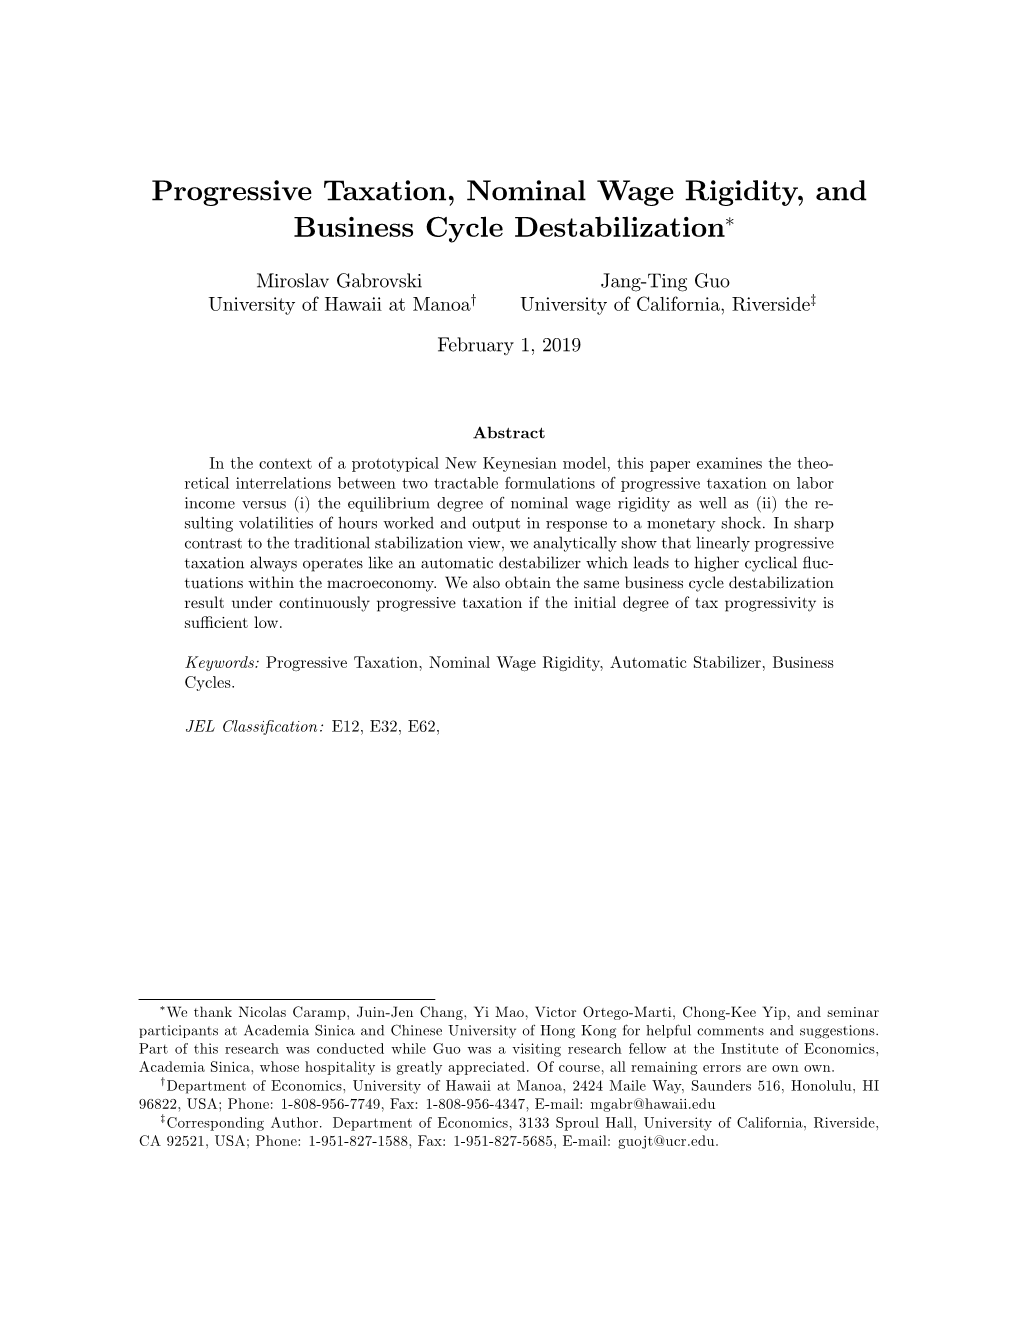 Progressive Taxation, Nominal Wage Rigidity, and Business Cycle Destabilization